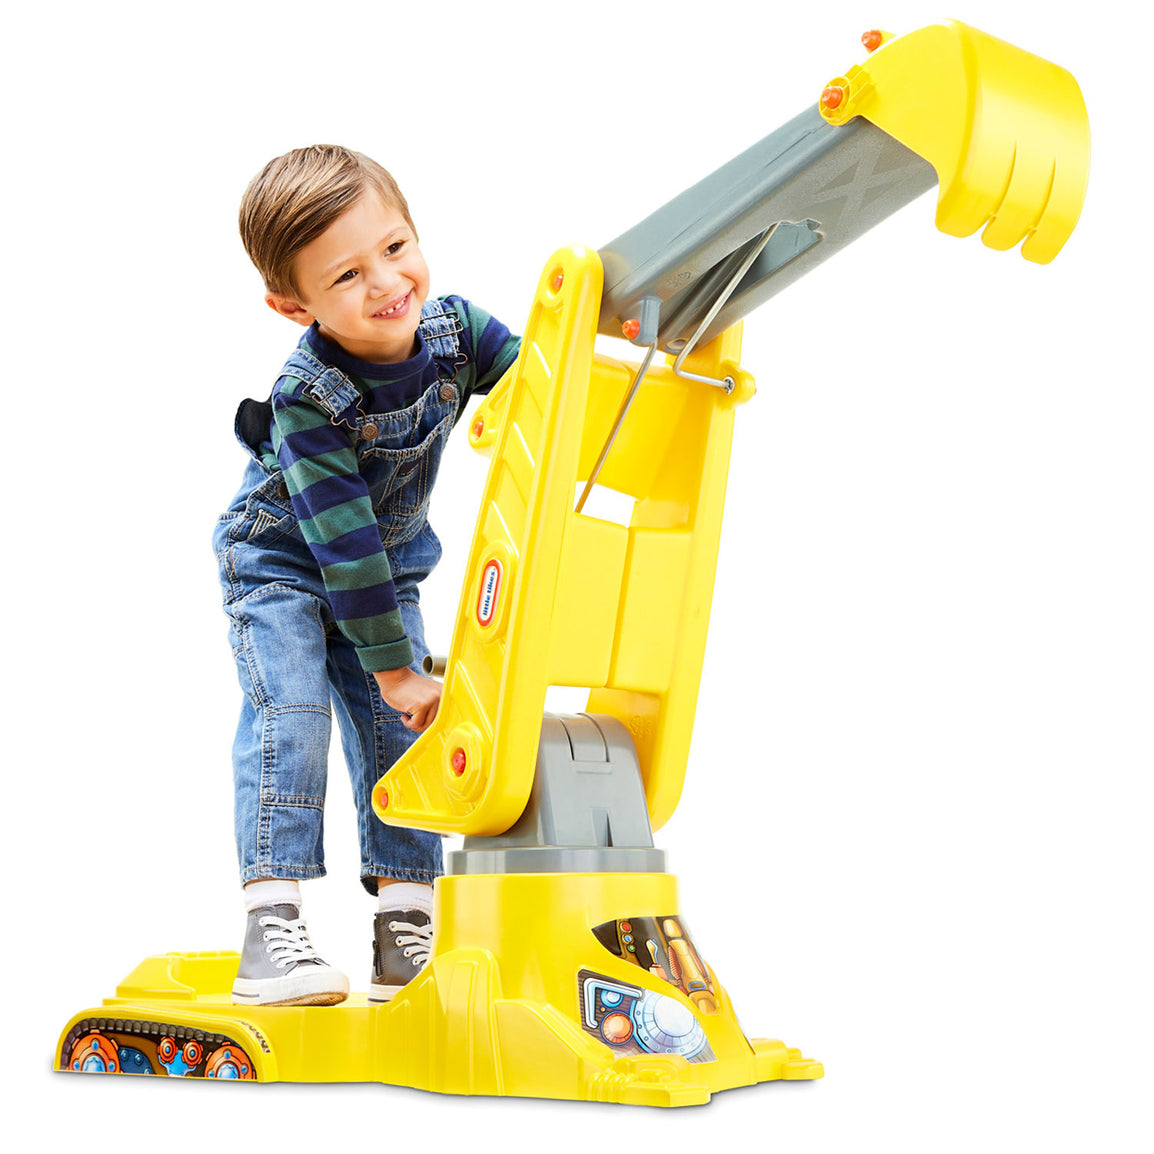 You Drive Excavator - Official Little Tikes Website